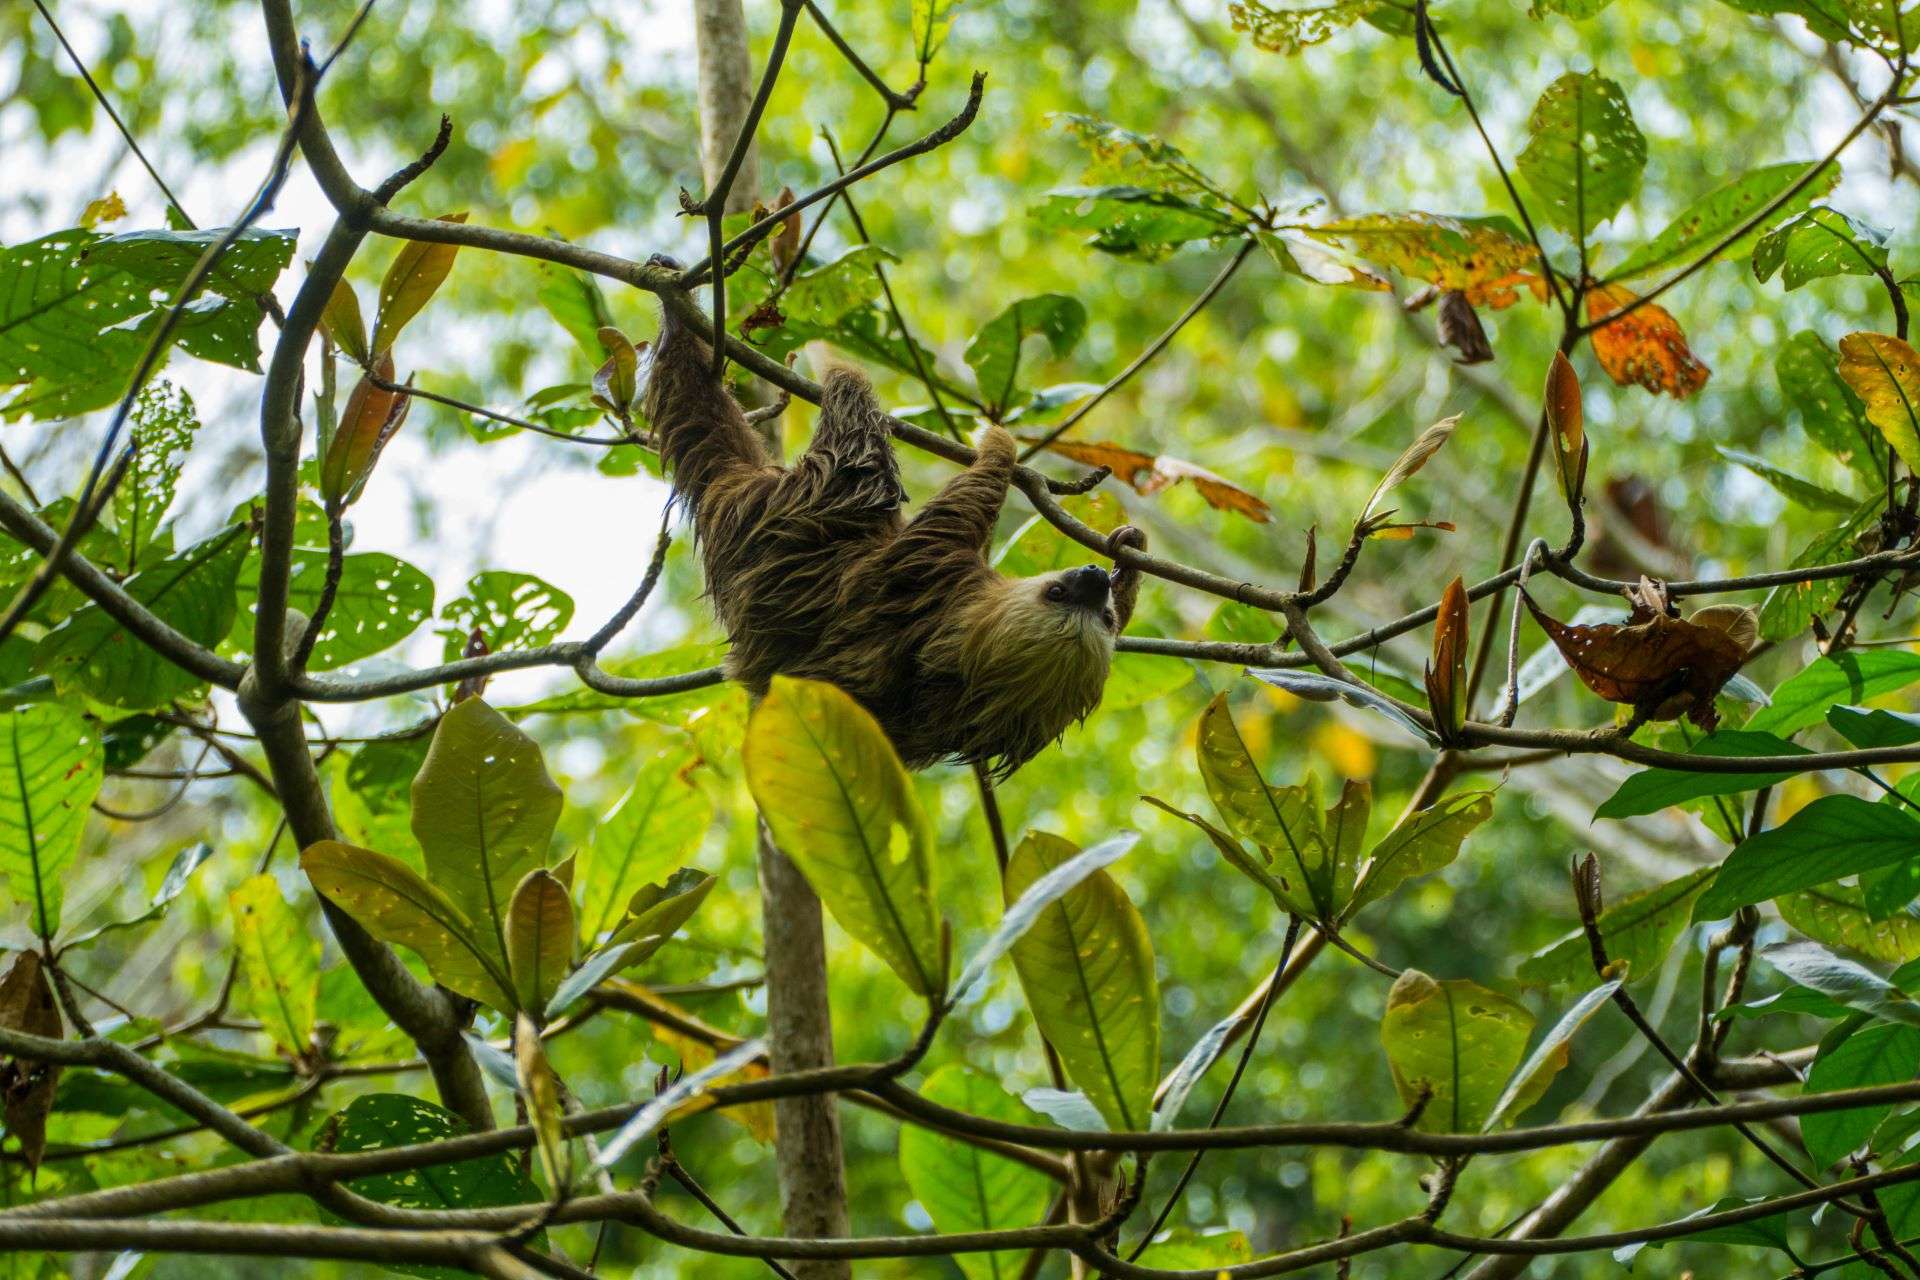 A sloth hanging on a tree branch in Costa Rica